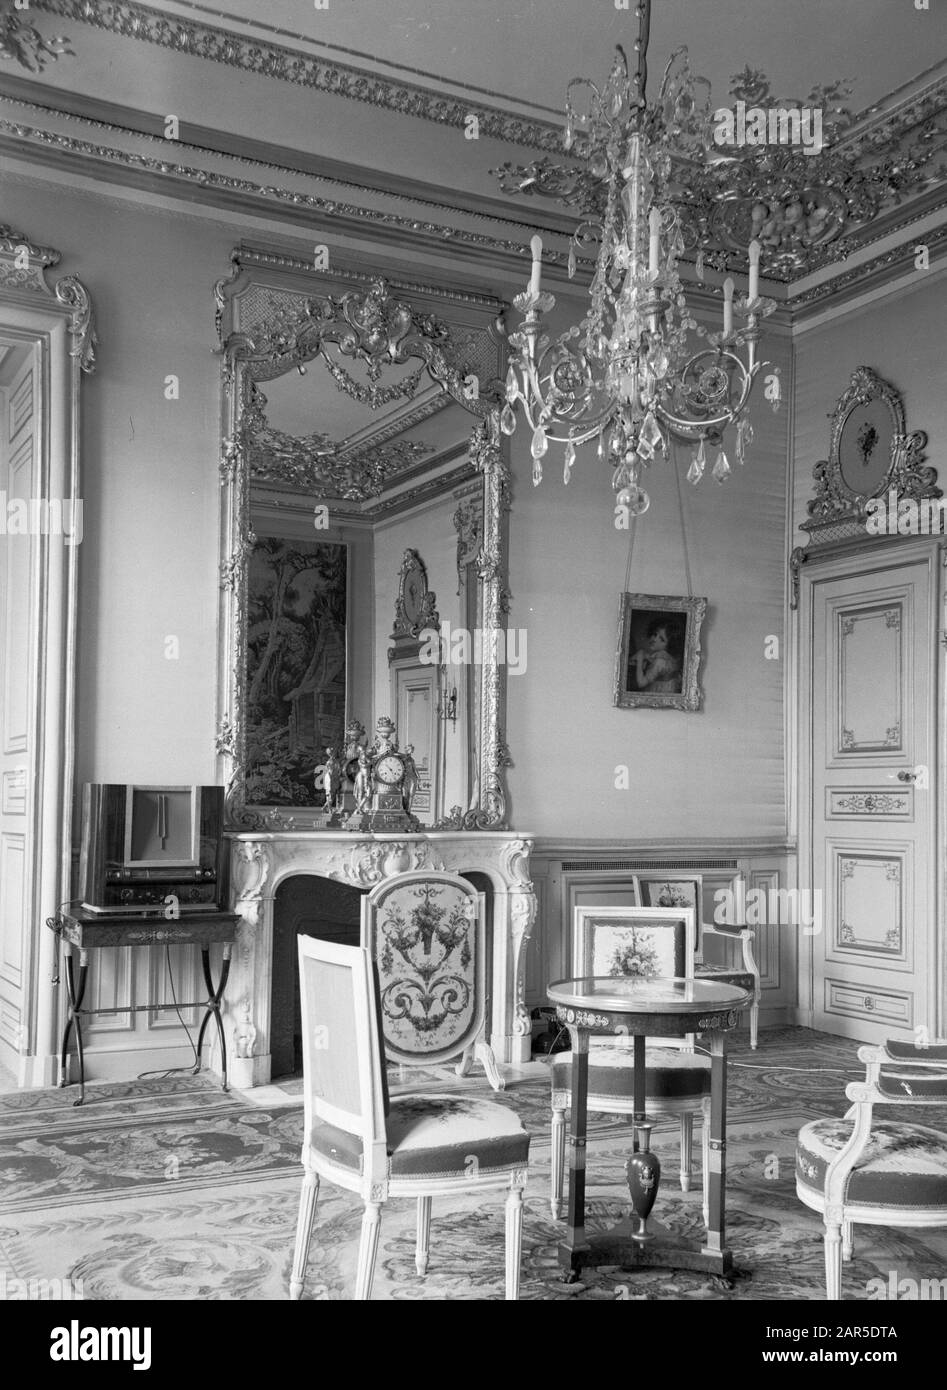 Interior of a palace (Elysée in Paris?) Date: 1938 Location: France, Paris Keywords: interior, rooms, palaces, mirrors, chairs Institution name: Palais d'Orsay Stock Photo